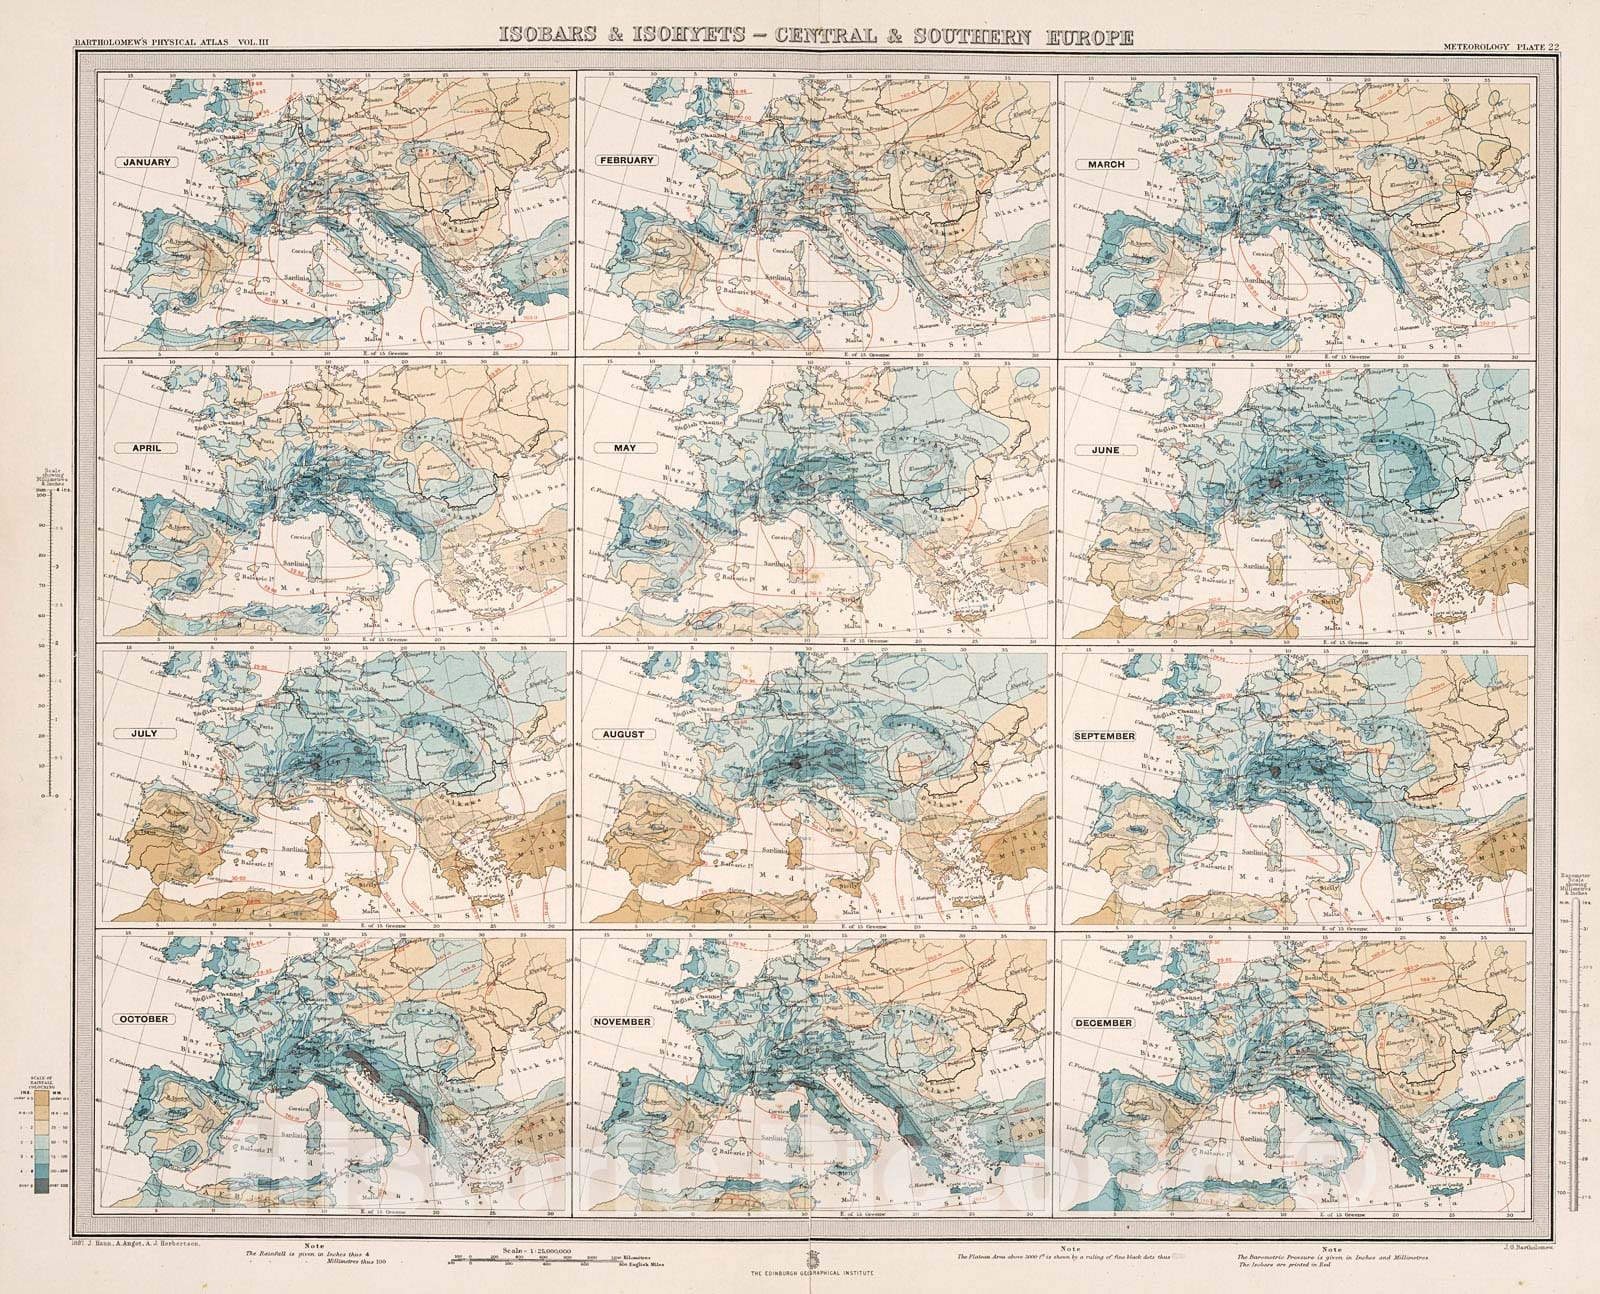 Historic Map : Plate 22. Isobars & Isohyets - Central & Southern Europe., 1899, Vintage Wall Decor